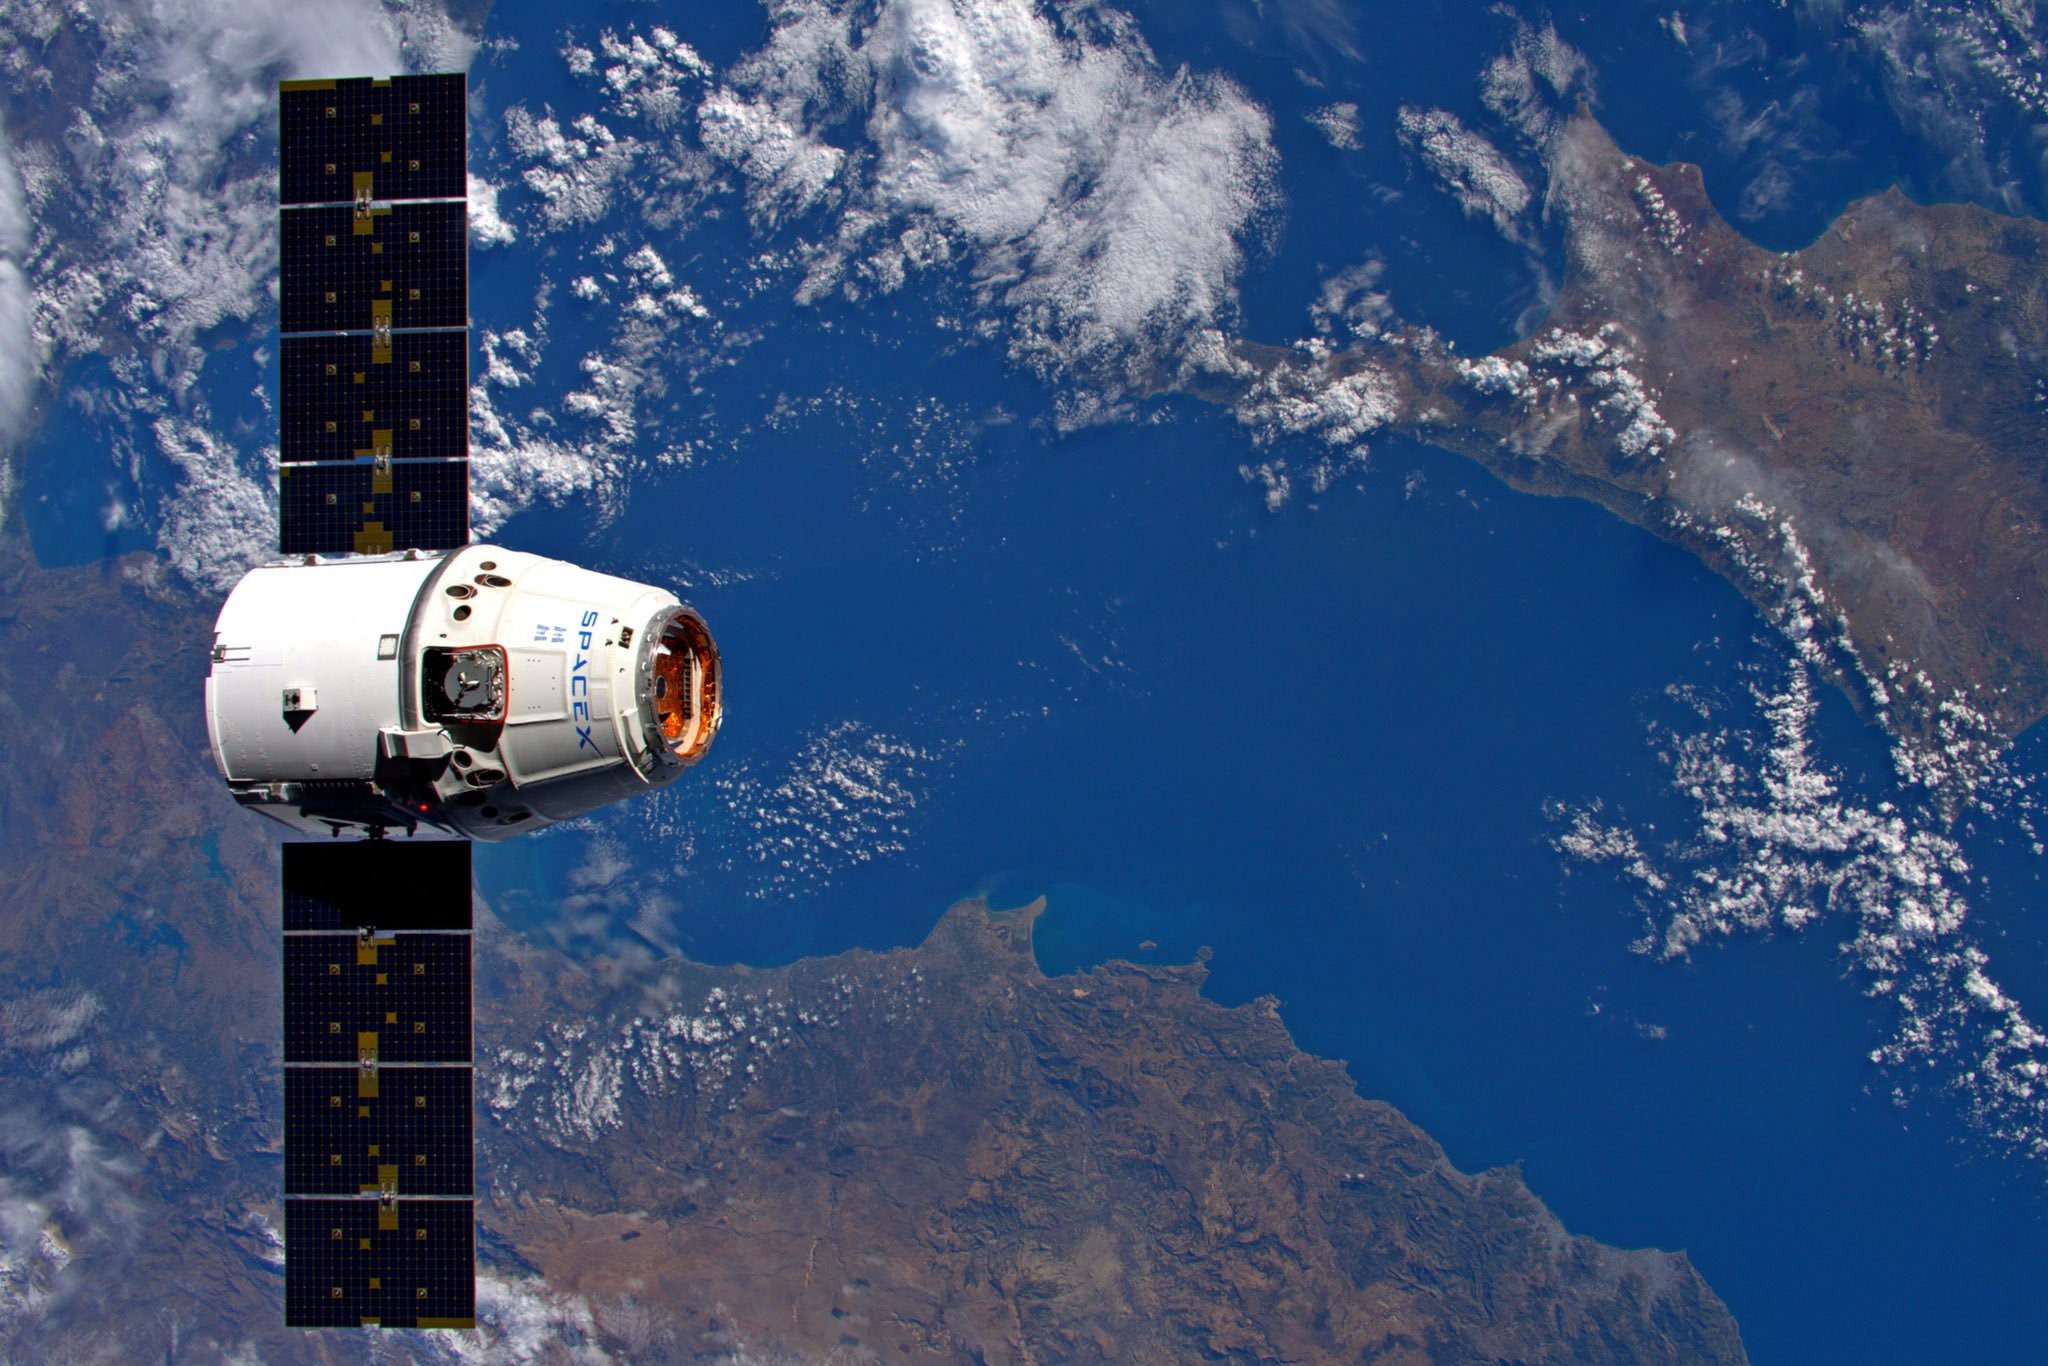 Astronauts on the International Space Station capture a SpaceX Dragon resupply vehicle Dec. 8. 